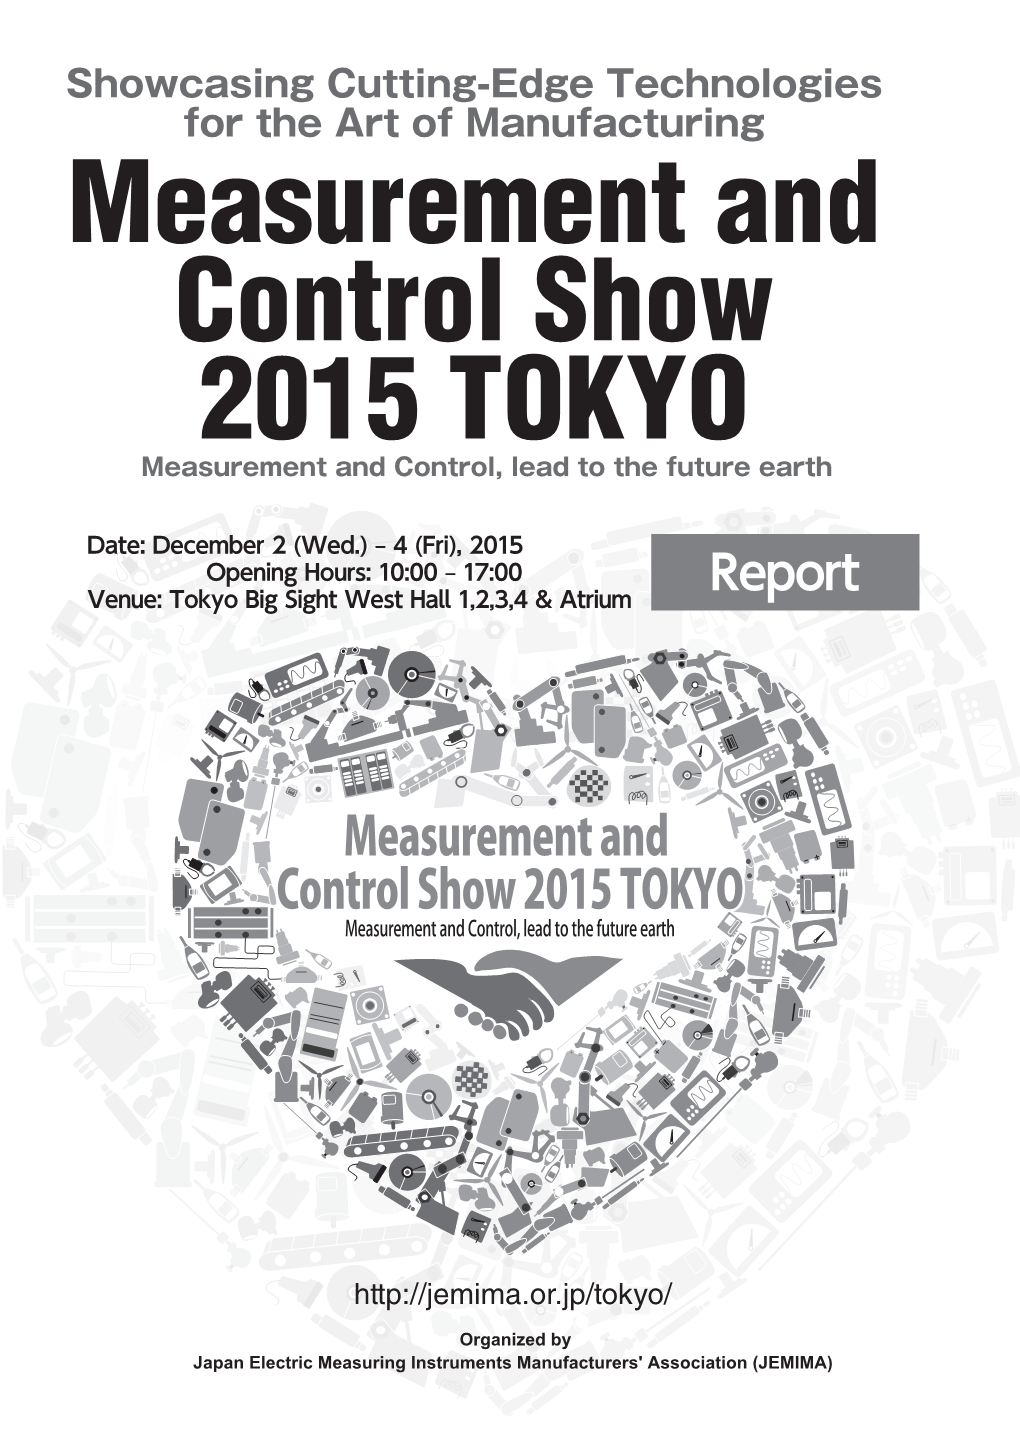 Measurement and Control Show 2015 TOKYO Measurement and Control, Lead to the Future Earth